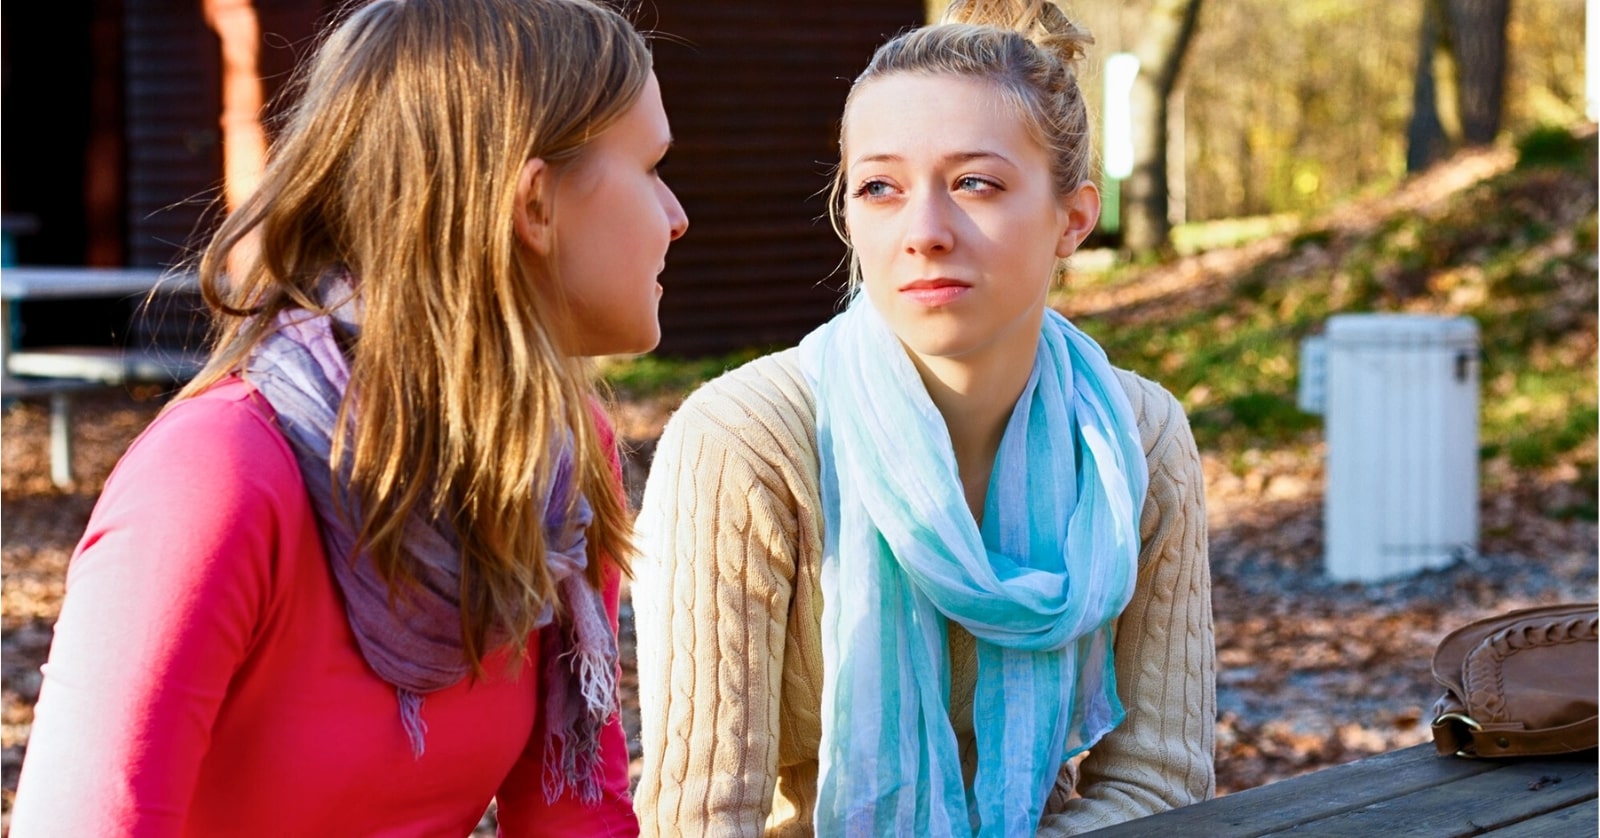 two women in their twenties talking while sitting on a bench outdoors